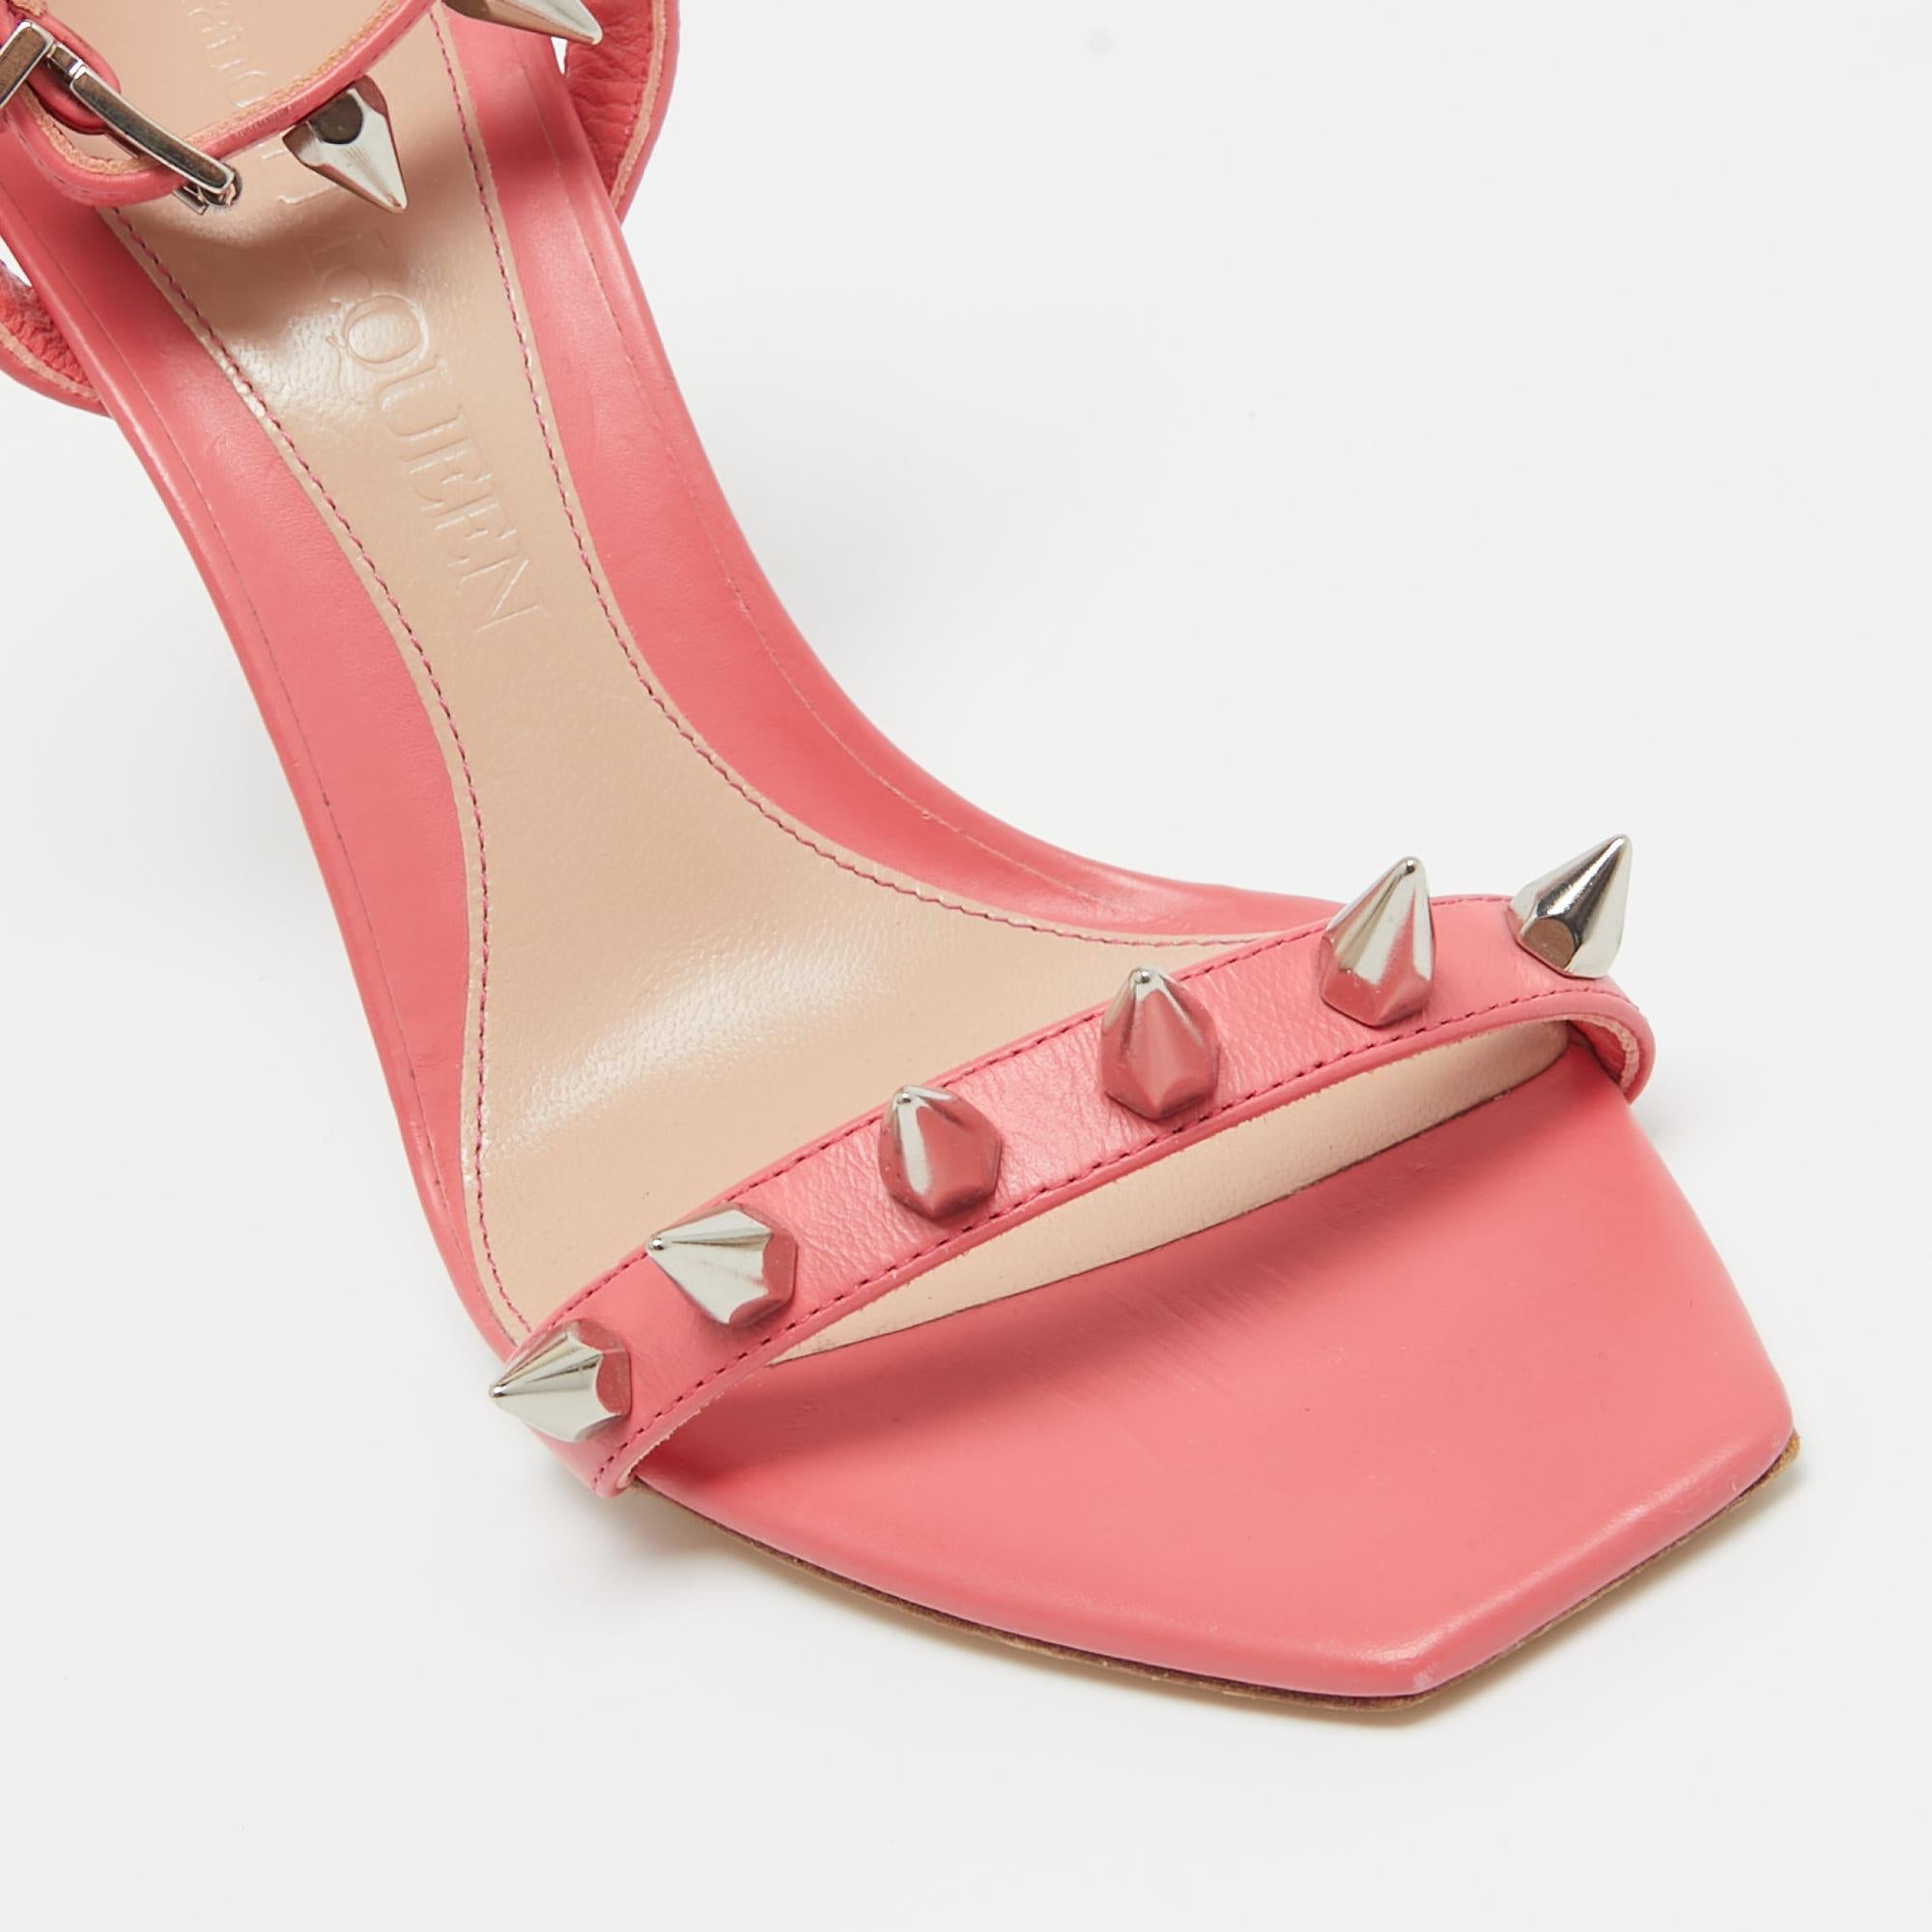 Women's Alexander McQueen Pink Leather Spike Ankle Strap Sandals Size 36.5 For Sale